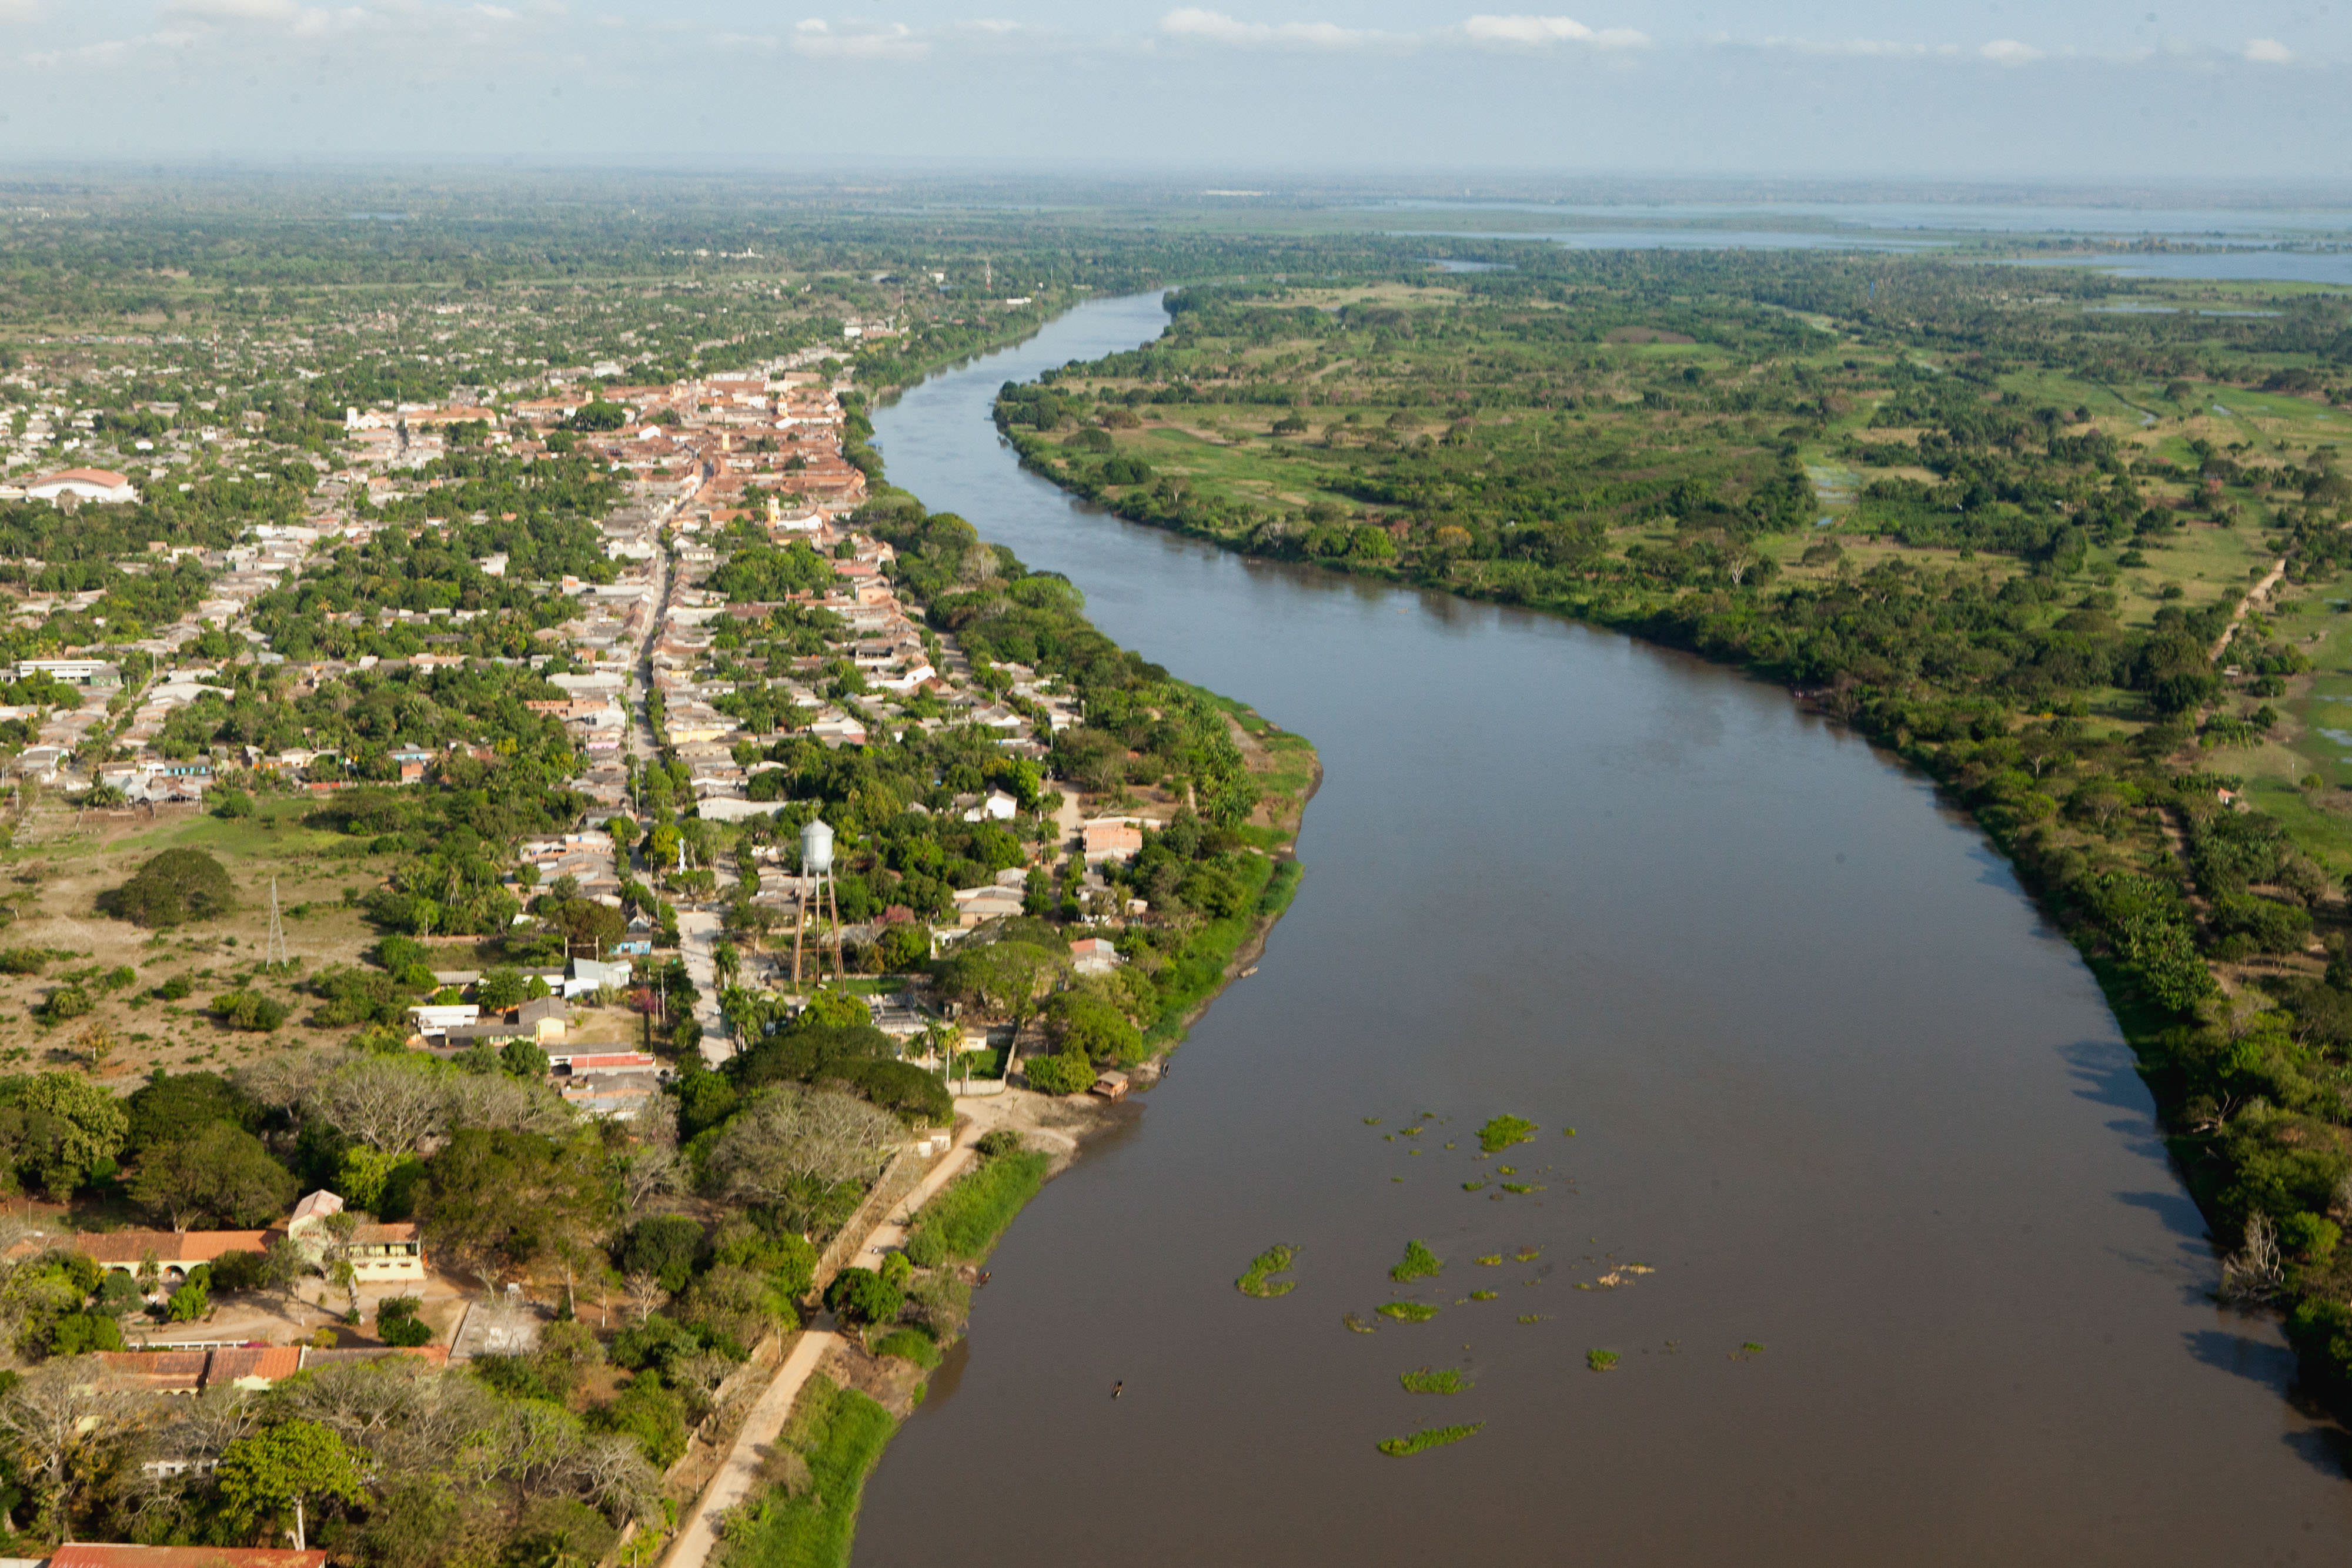 Aerial view of the town of Mompox, Bolivar